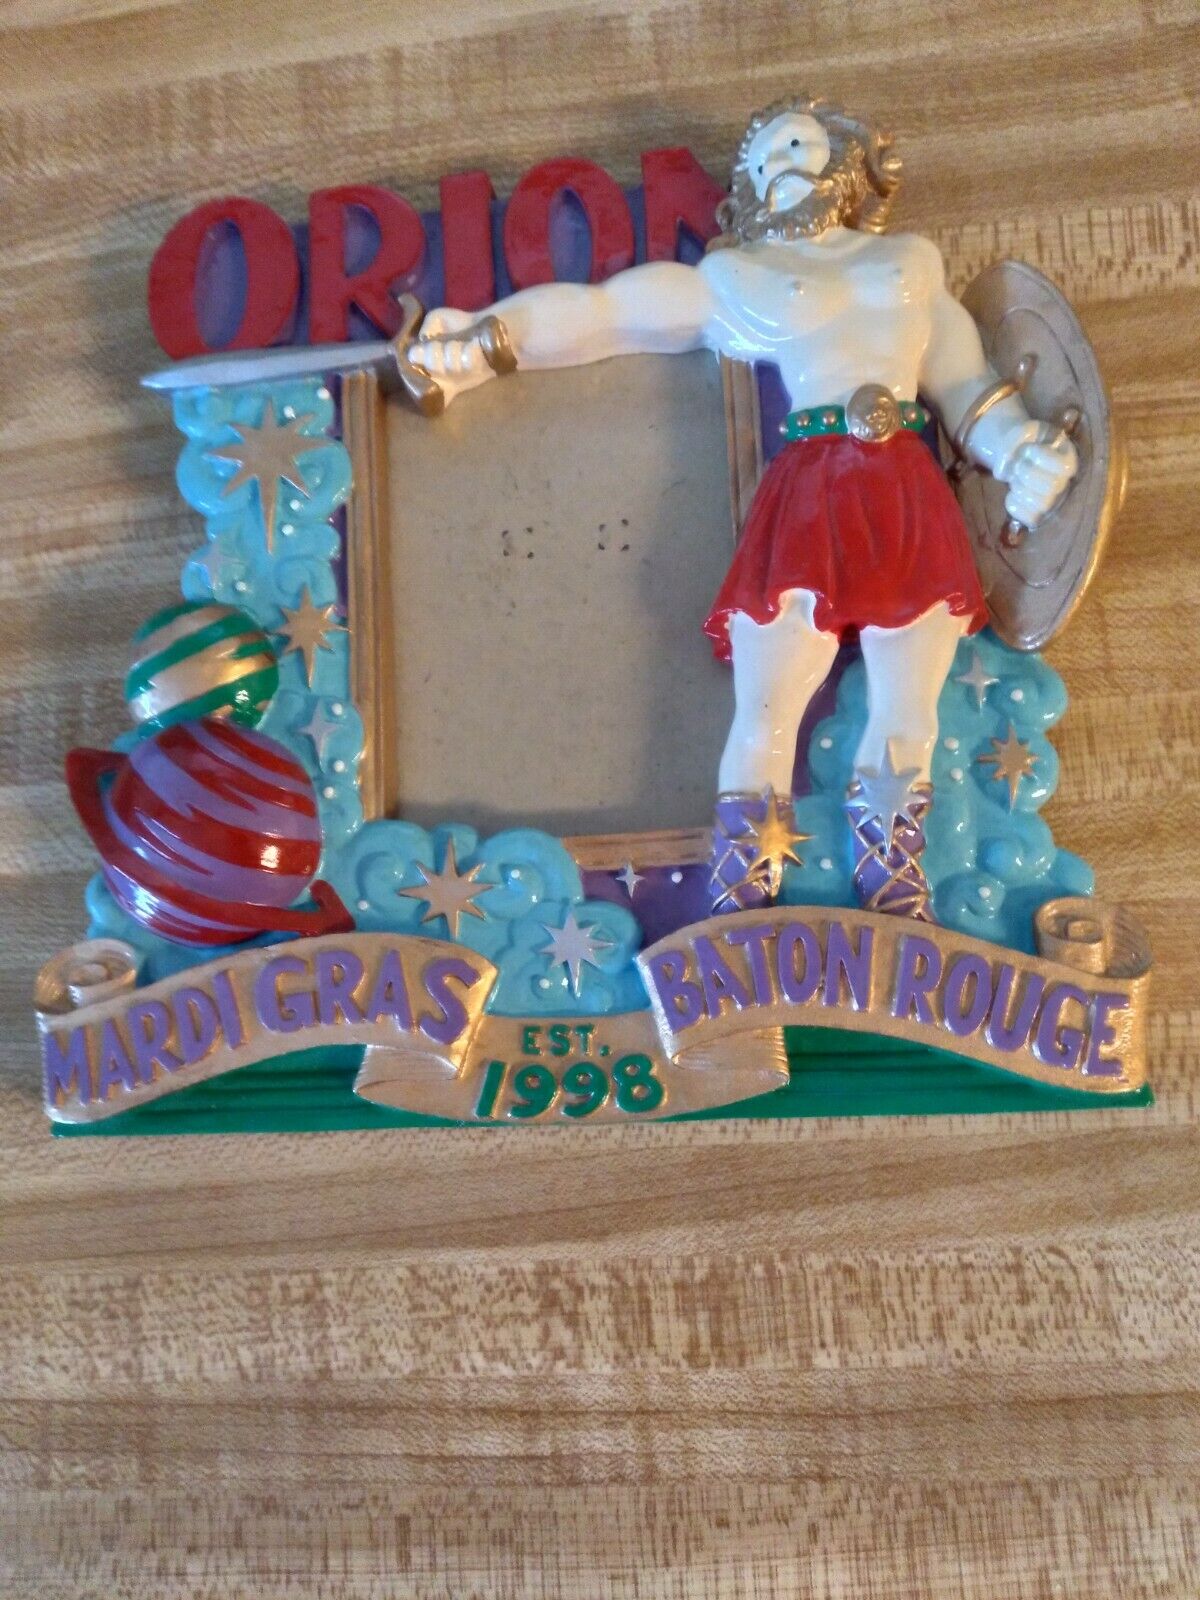 1998 KREWE OF ORION BATON ROUGE MARDI GRAS PICTURE FRAME FAVOR PLANETS SATURN 